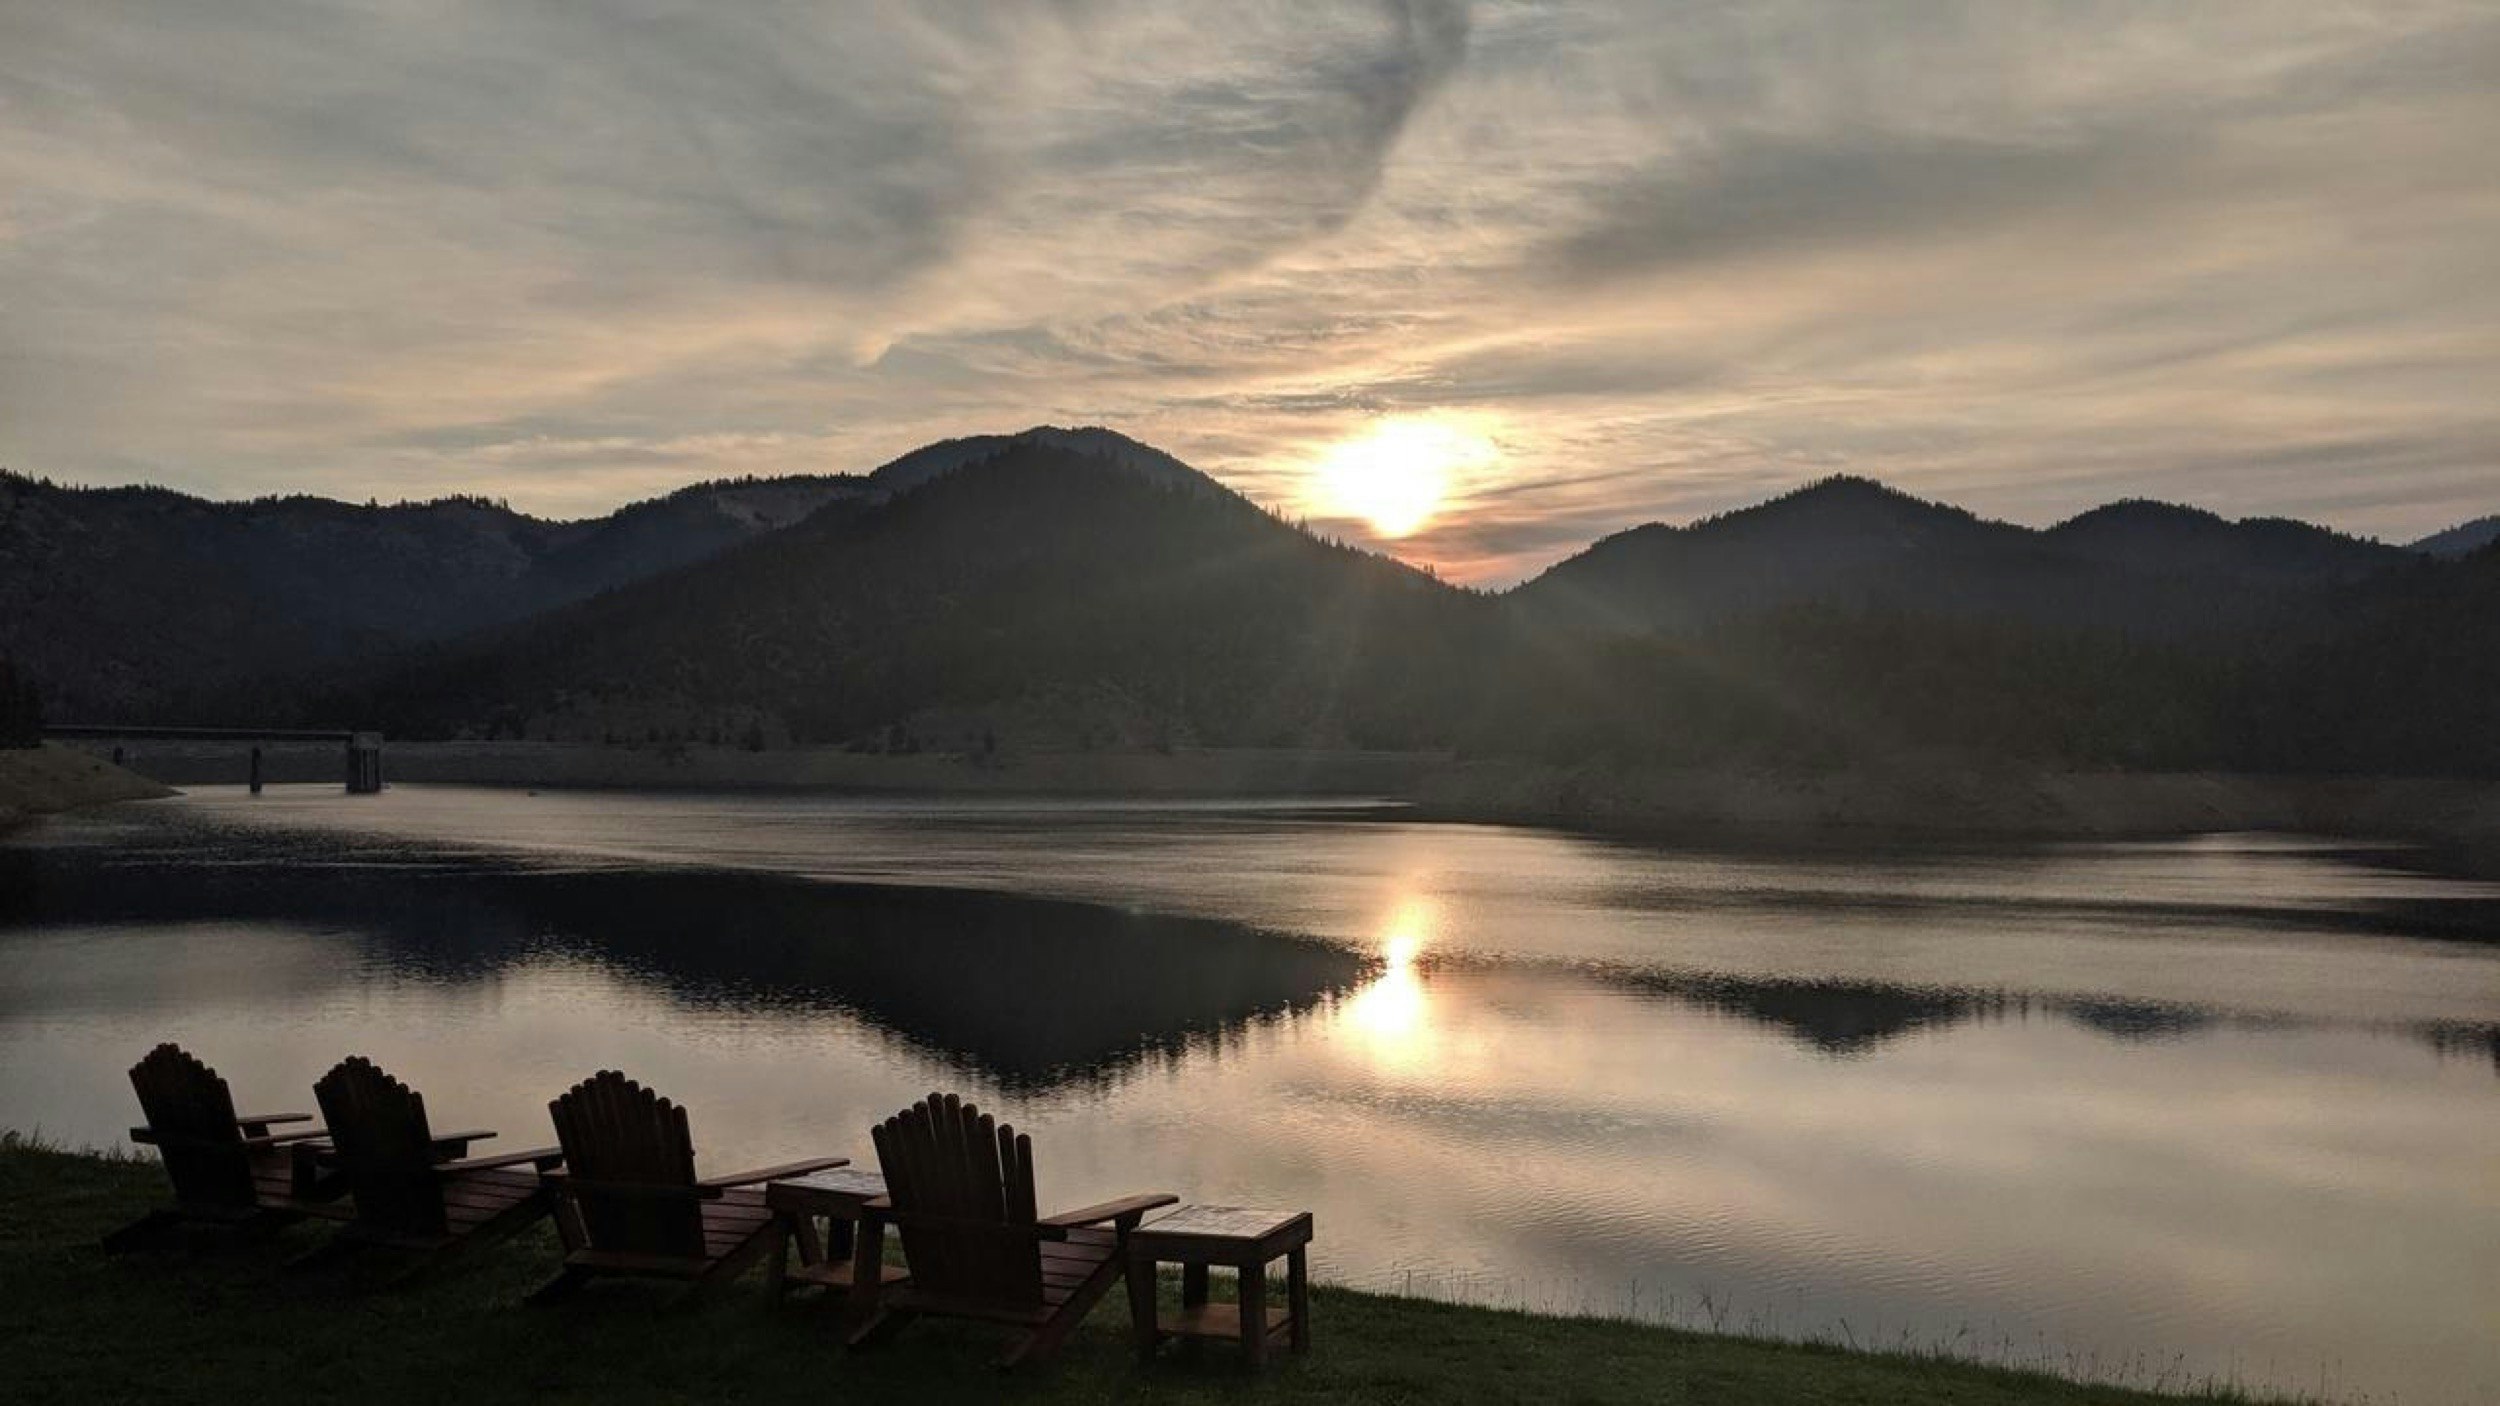 Adirondak chairs are set up next to a placid lake at the foot of a mountain at sunset in the Pacific Northwest